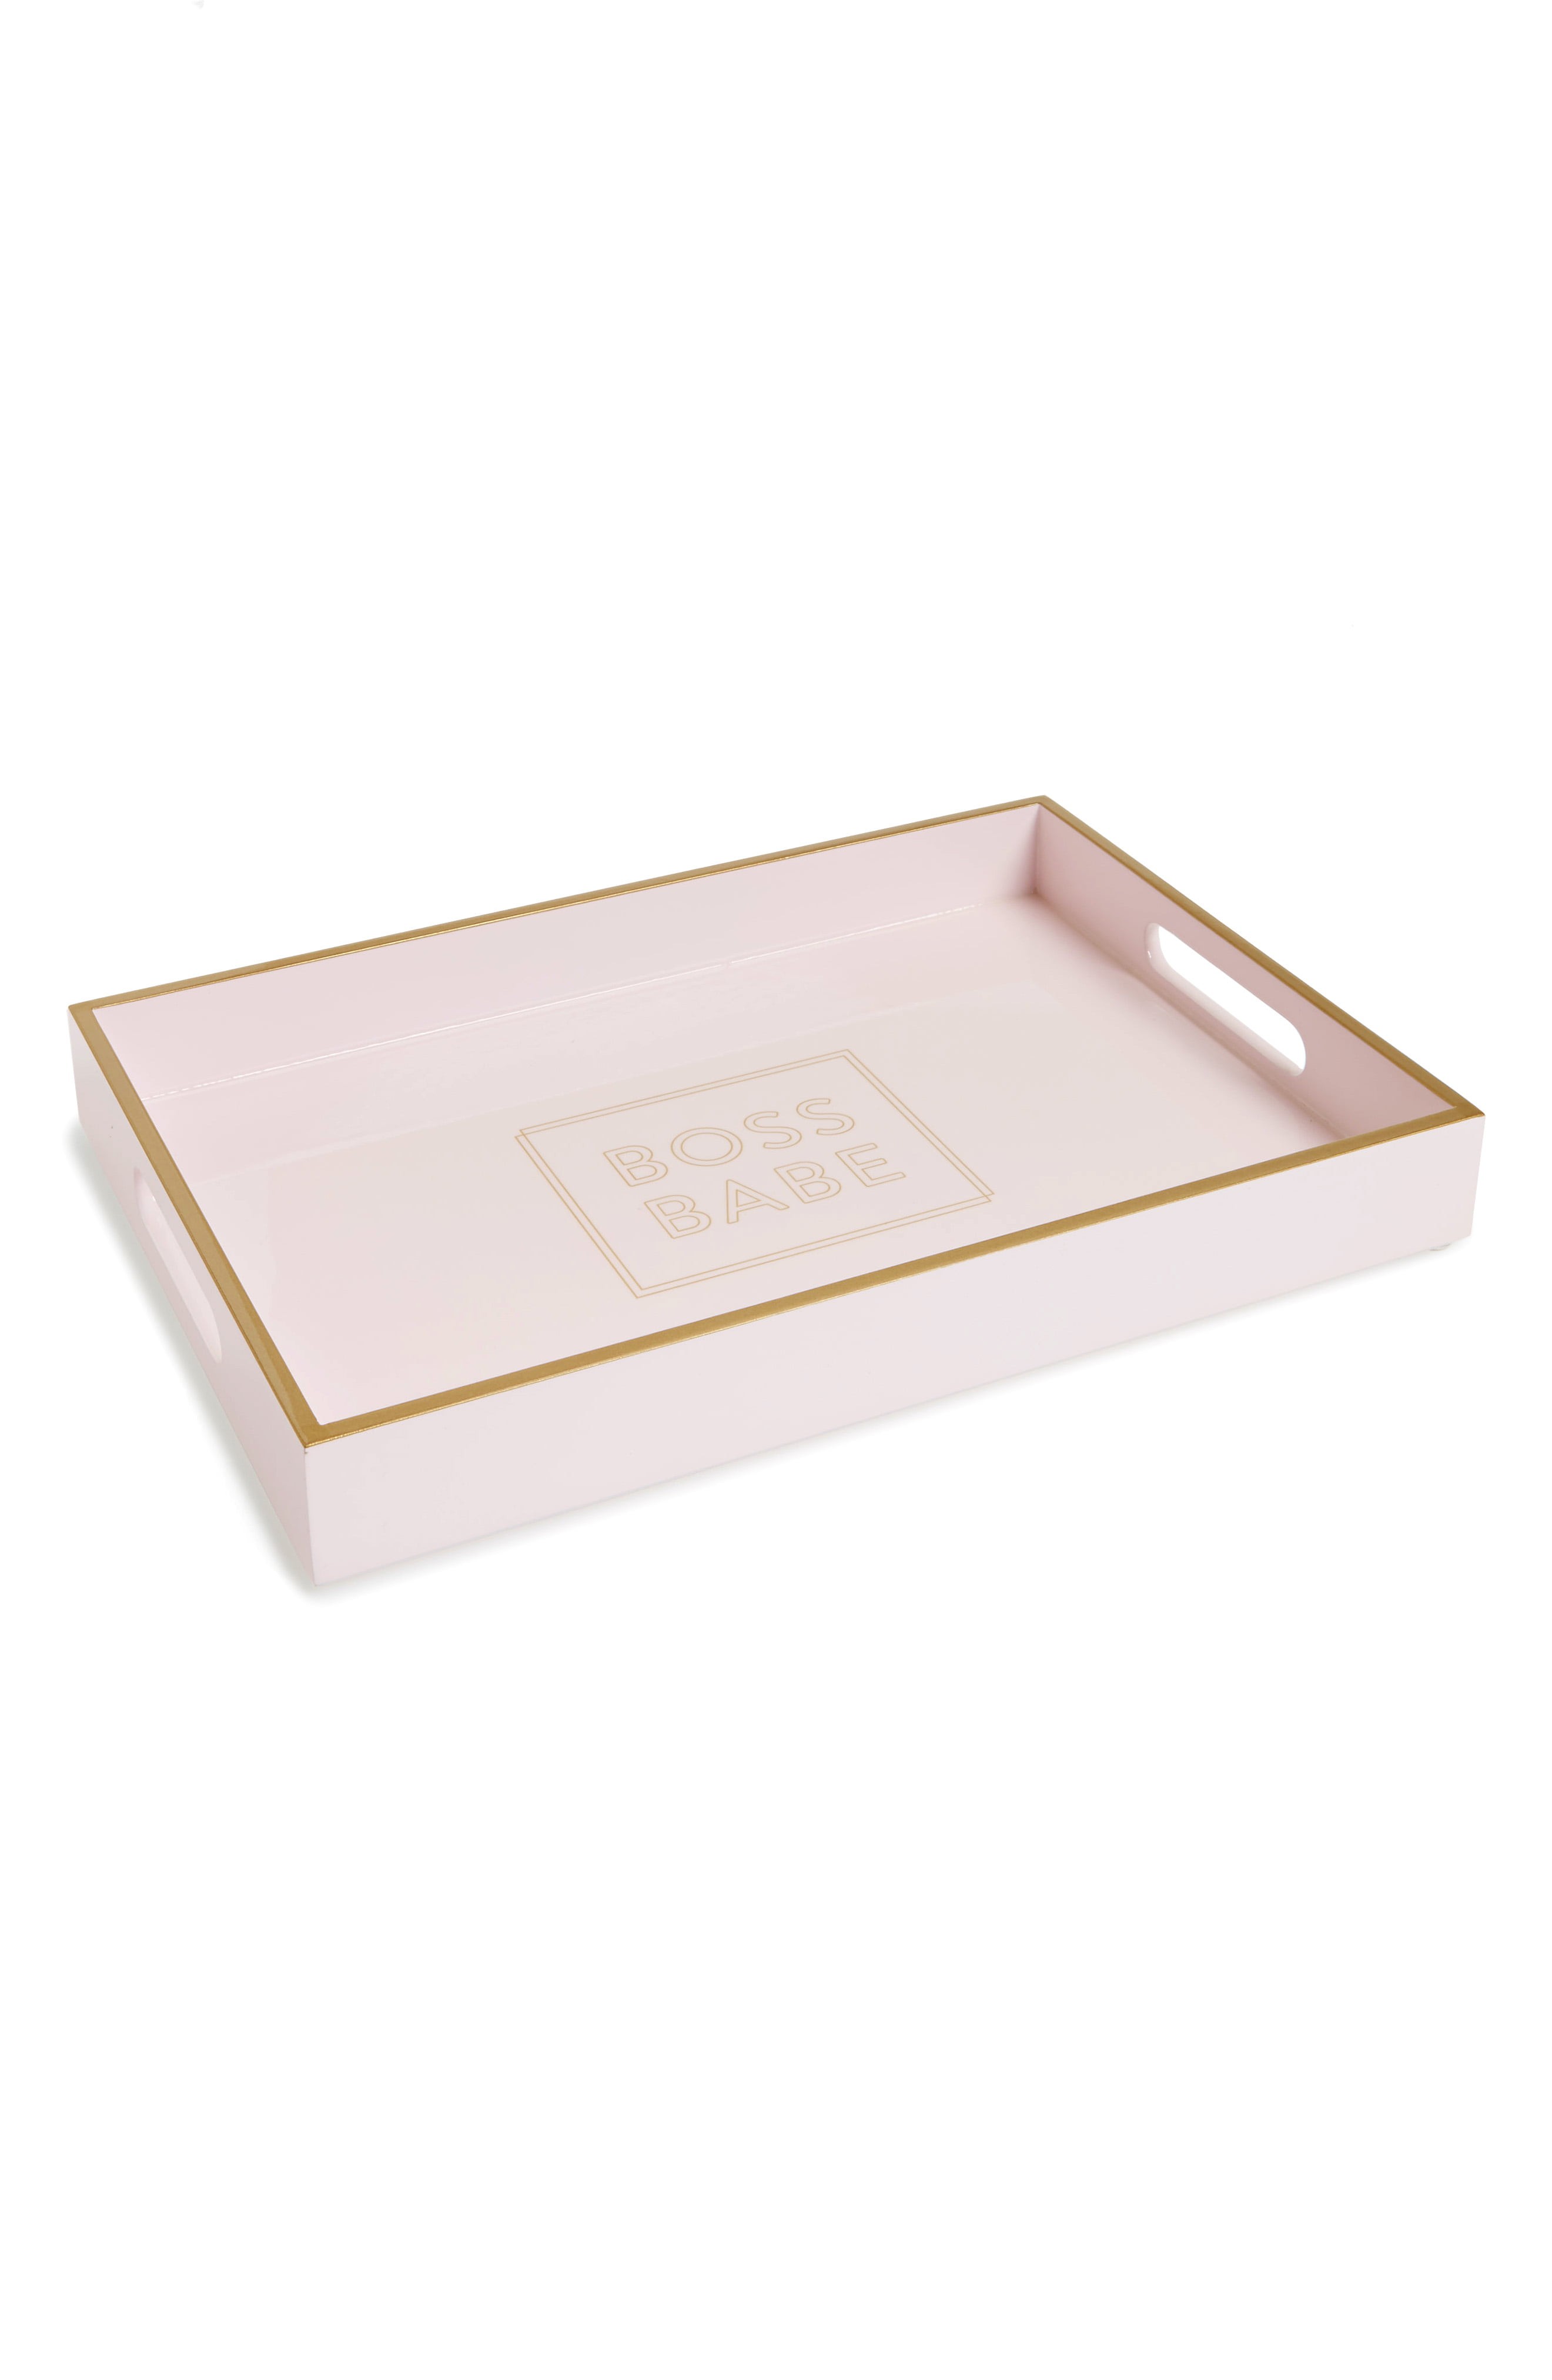 Click for more info about Boss Babe Lacquered Wooden Tray